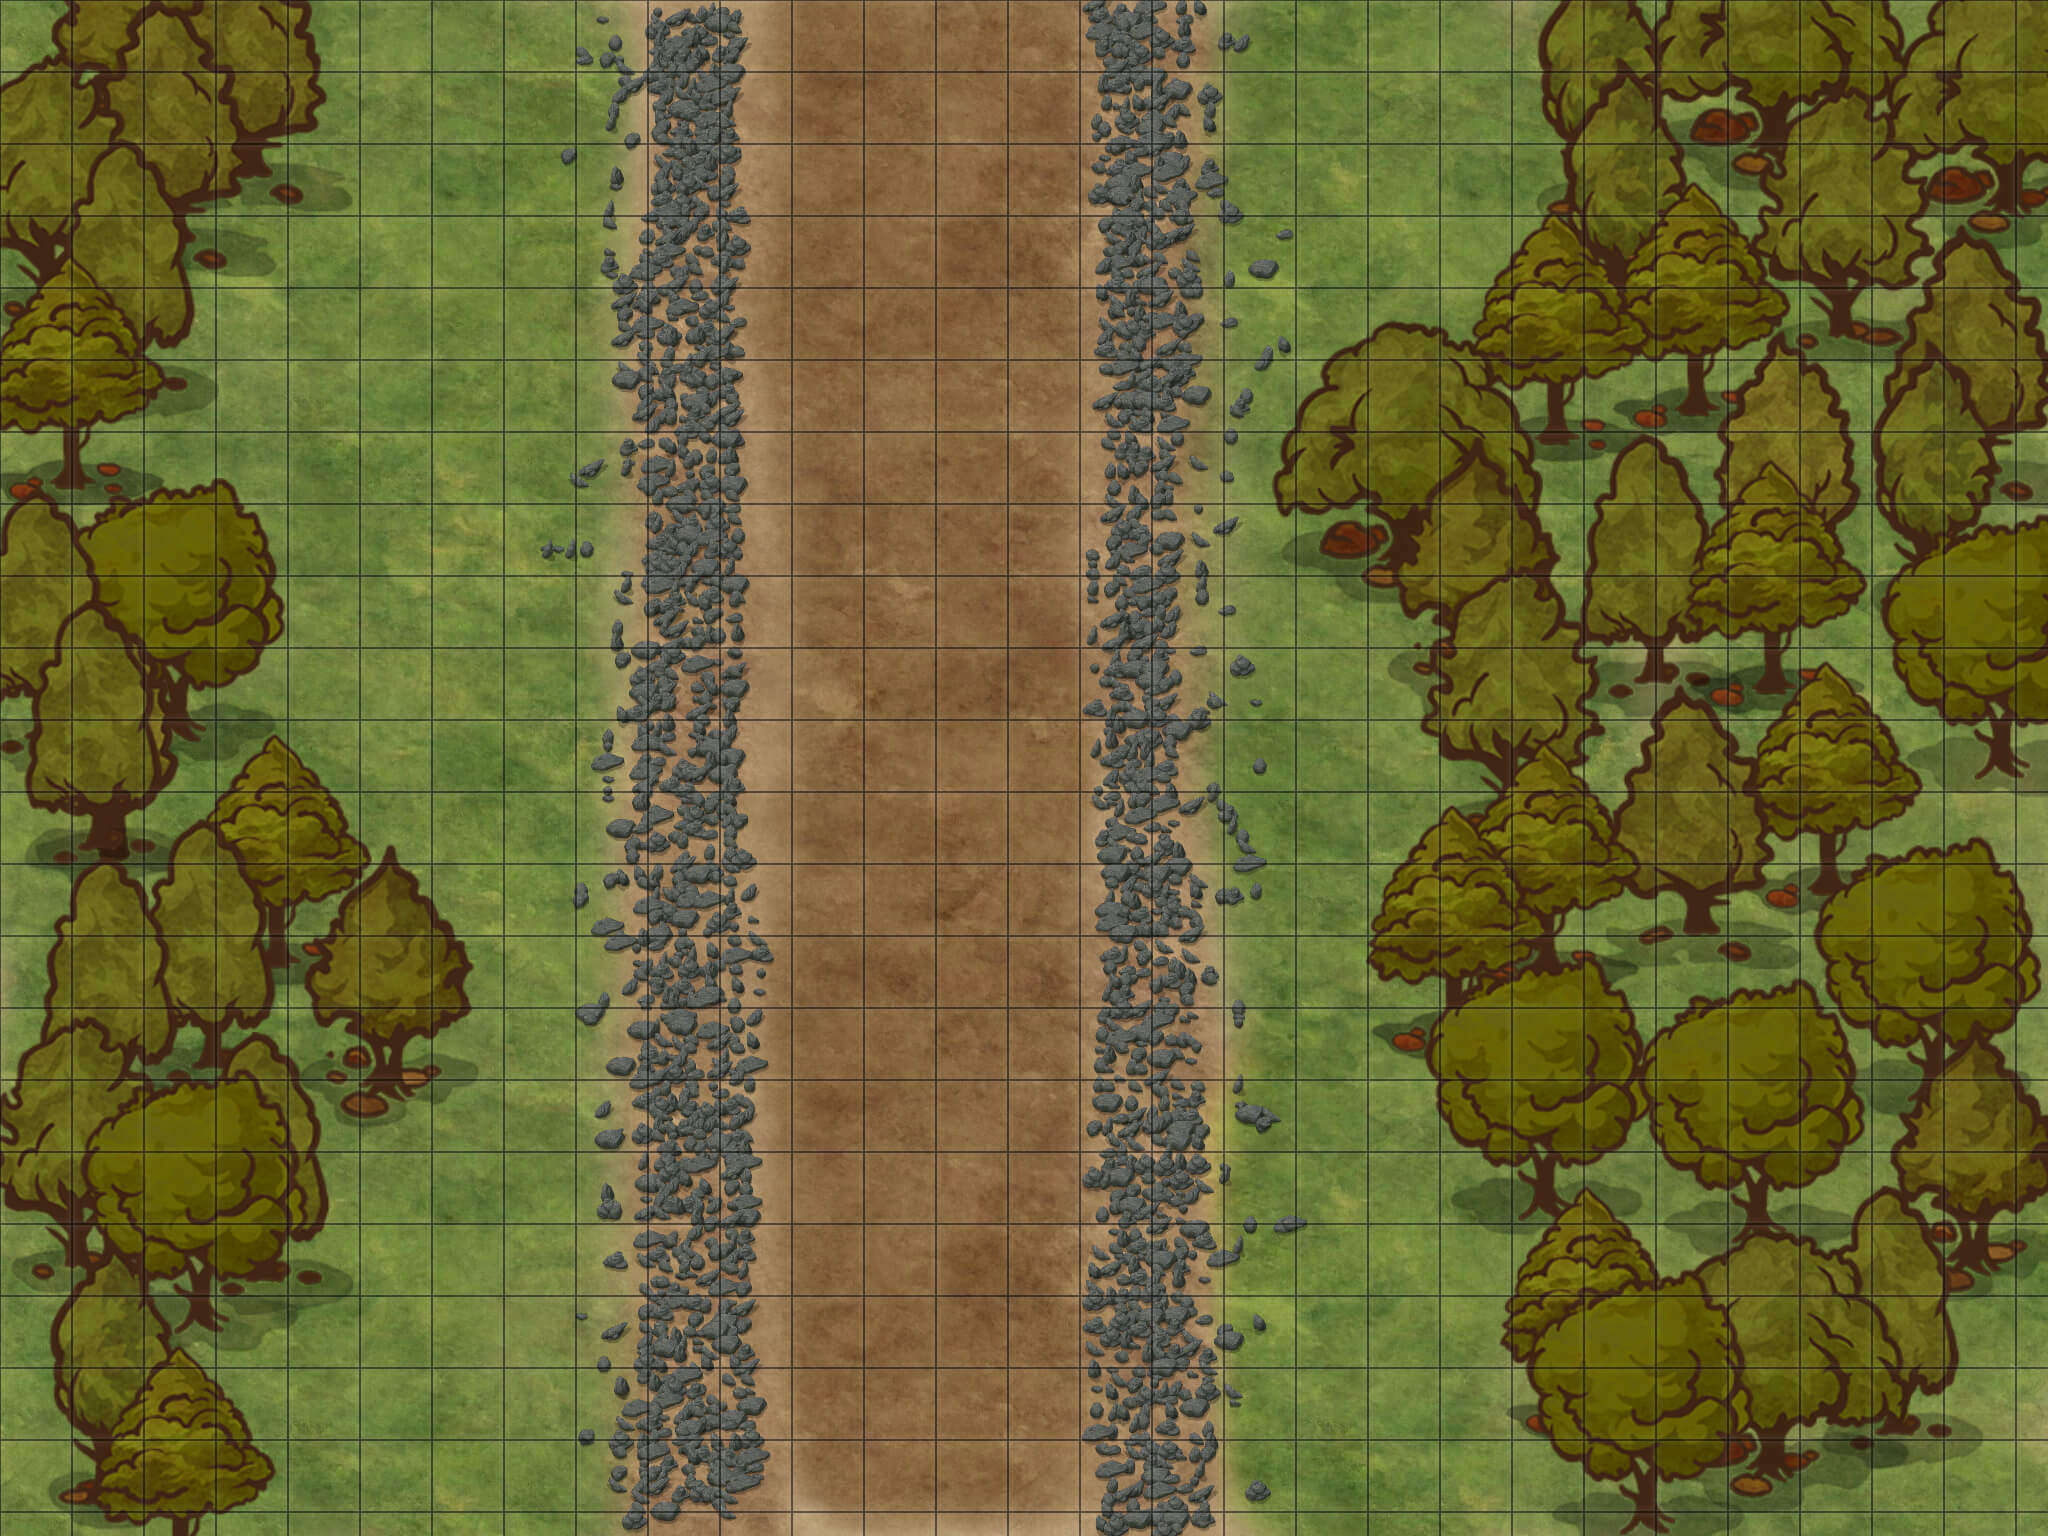 A battlemap that can be used for the Goblin Ambush in Lost Mine of Phandelver